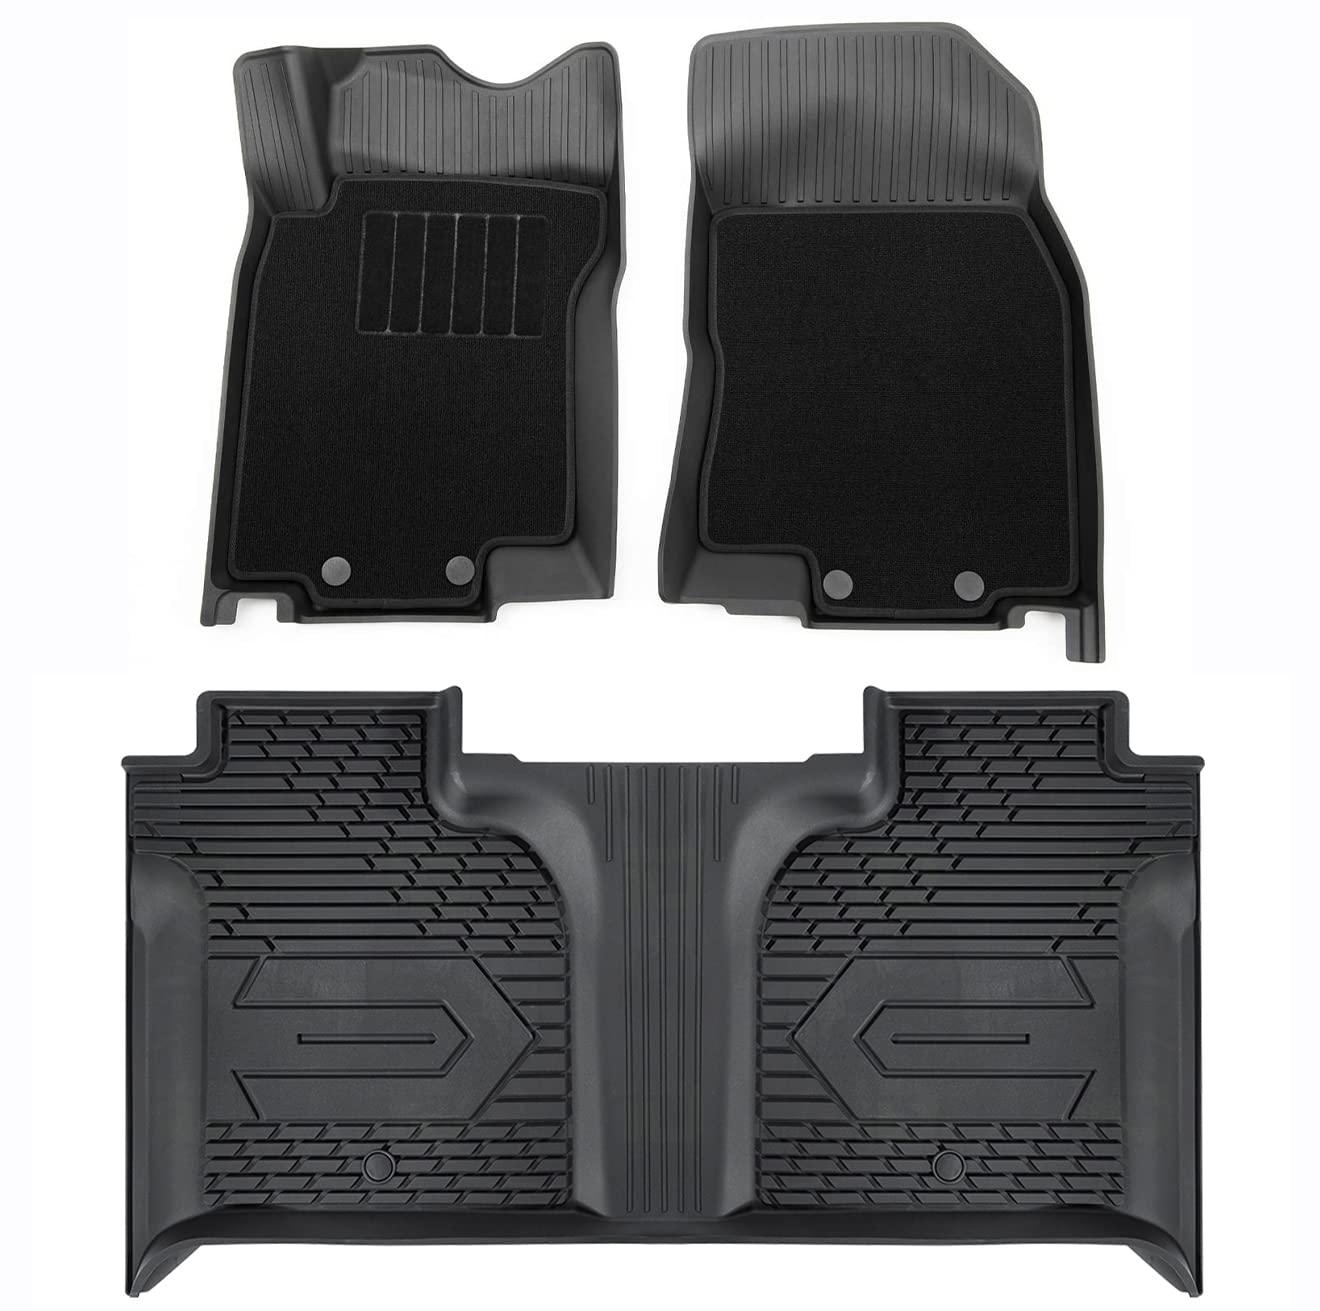 3W Custom Floor Mats 2019-2024 Chevy / Chevrolet Silverado 1500 2500 HD/3500HD Crew Cab TPE Material & All-Weather Protection Vehicles & Parts 3W 2019-2024 Silverado 2019-2024 1st&2nd Row Mats with Front Carpet